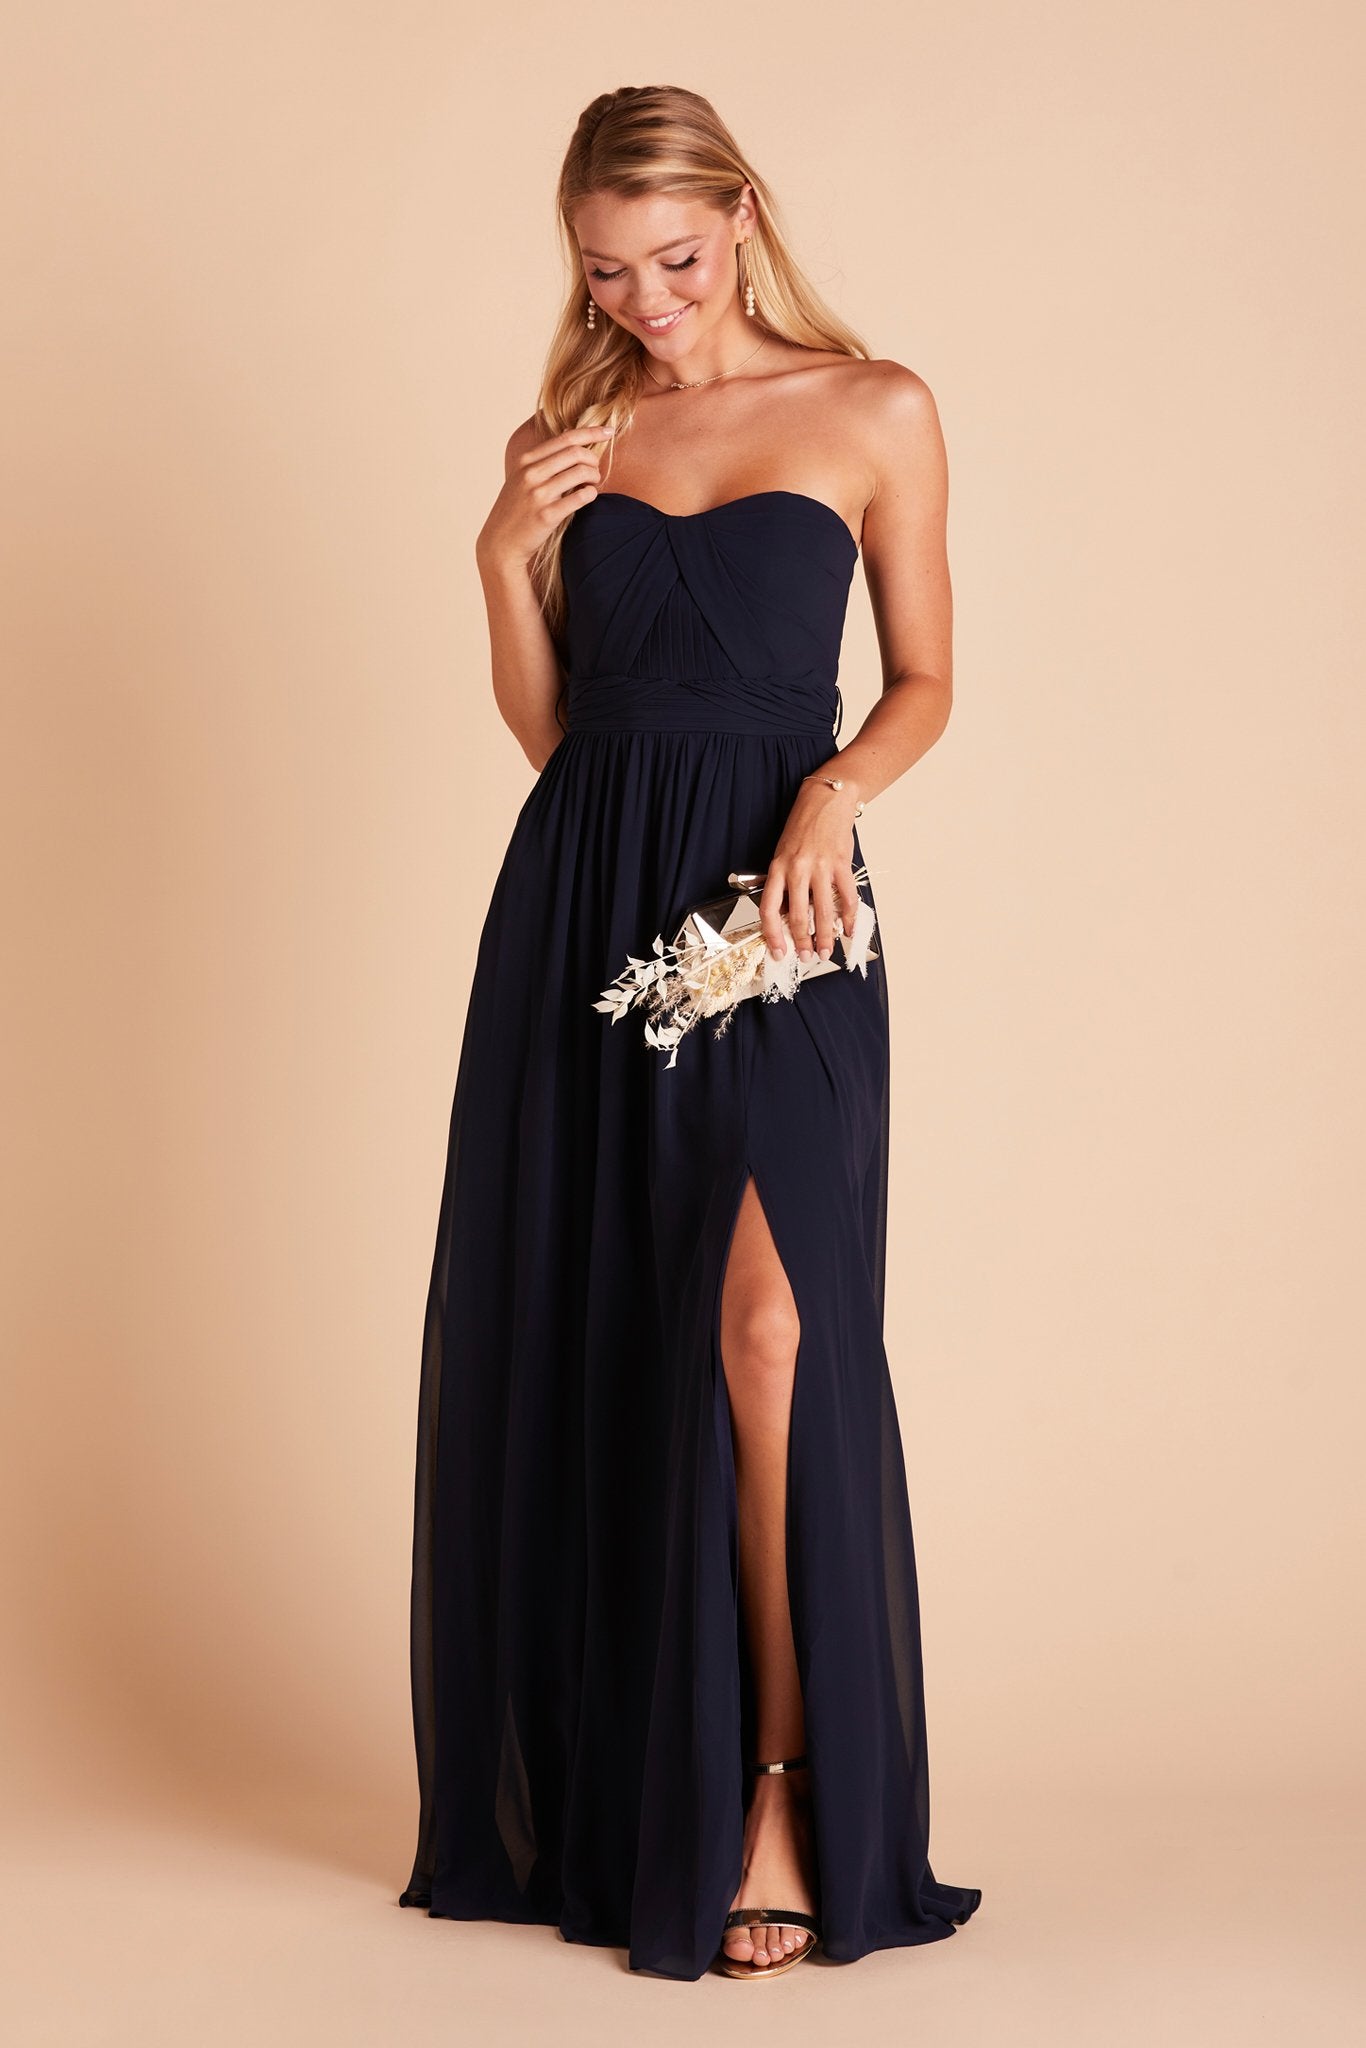 Grace convertible bridesmaid dress in navy blue chiffon with slit by Birdy Grey, front view